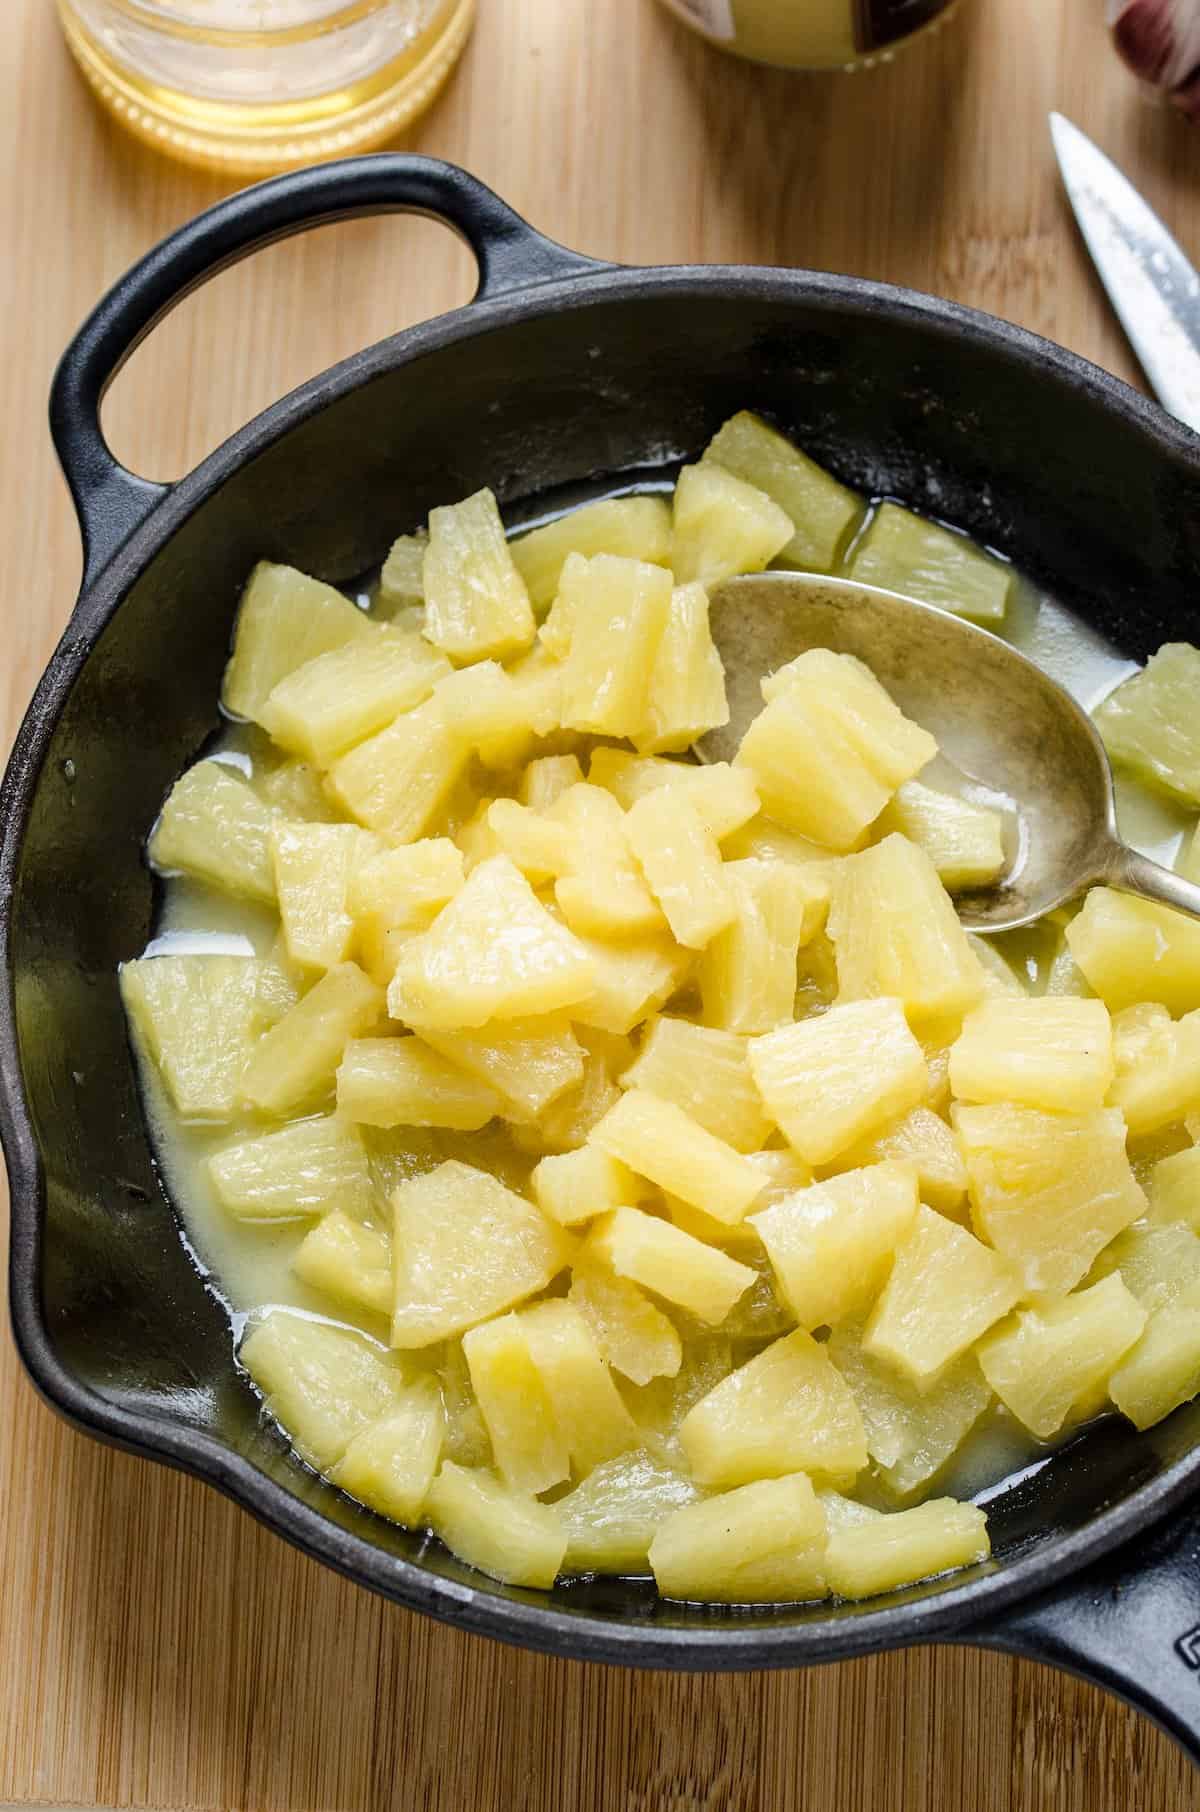 Chunks of pineapple are cooked in a skillet with melted butter.